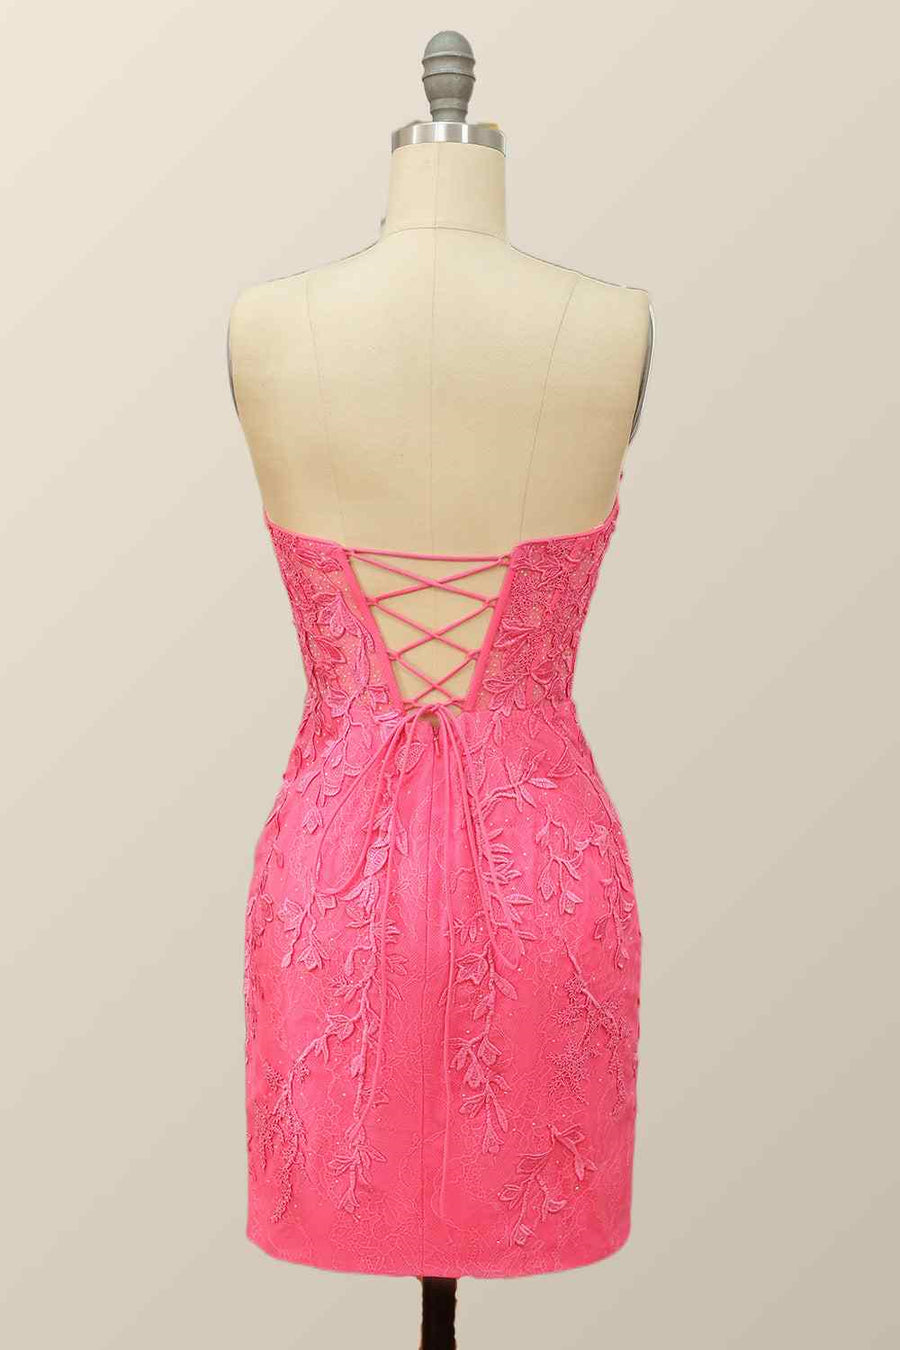 Hot Pink Sheath Strapless Lace-Up Back Applique Mini Homecoming Dress